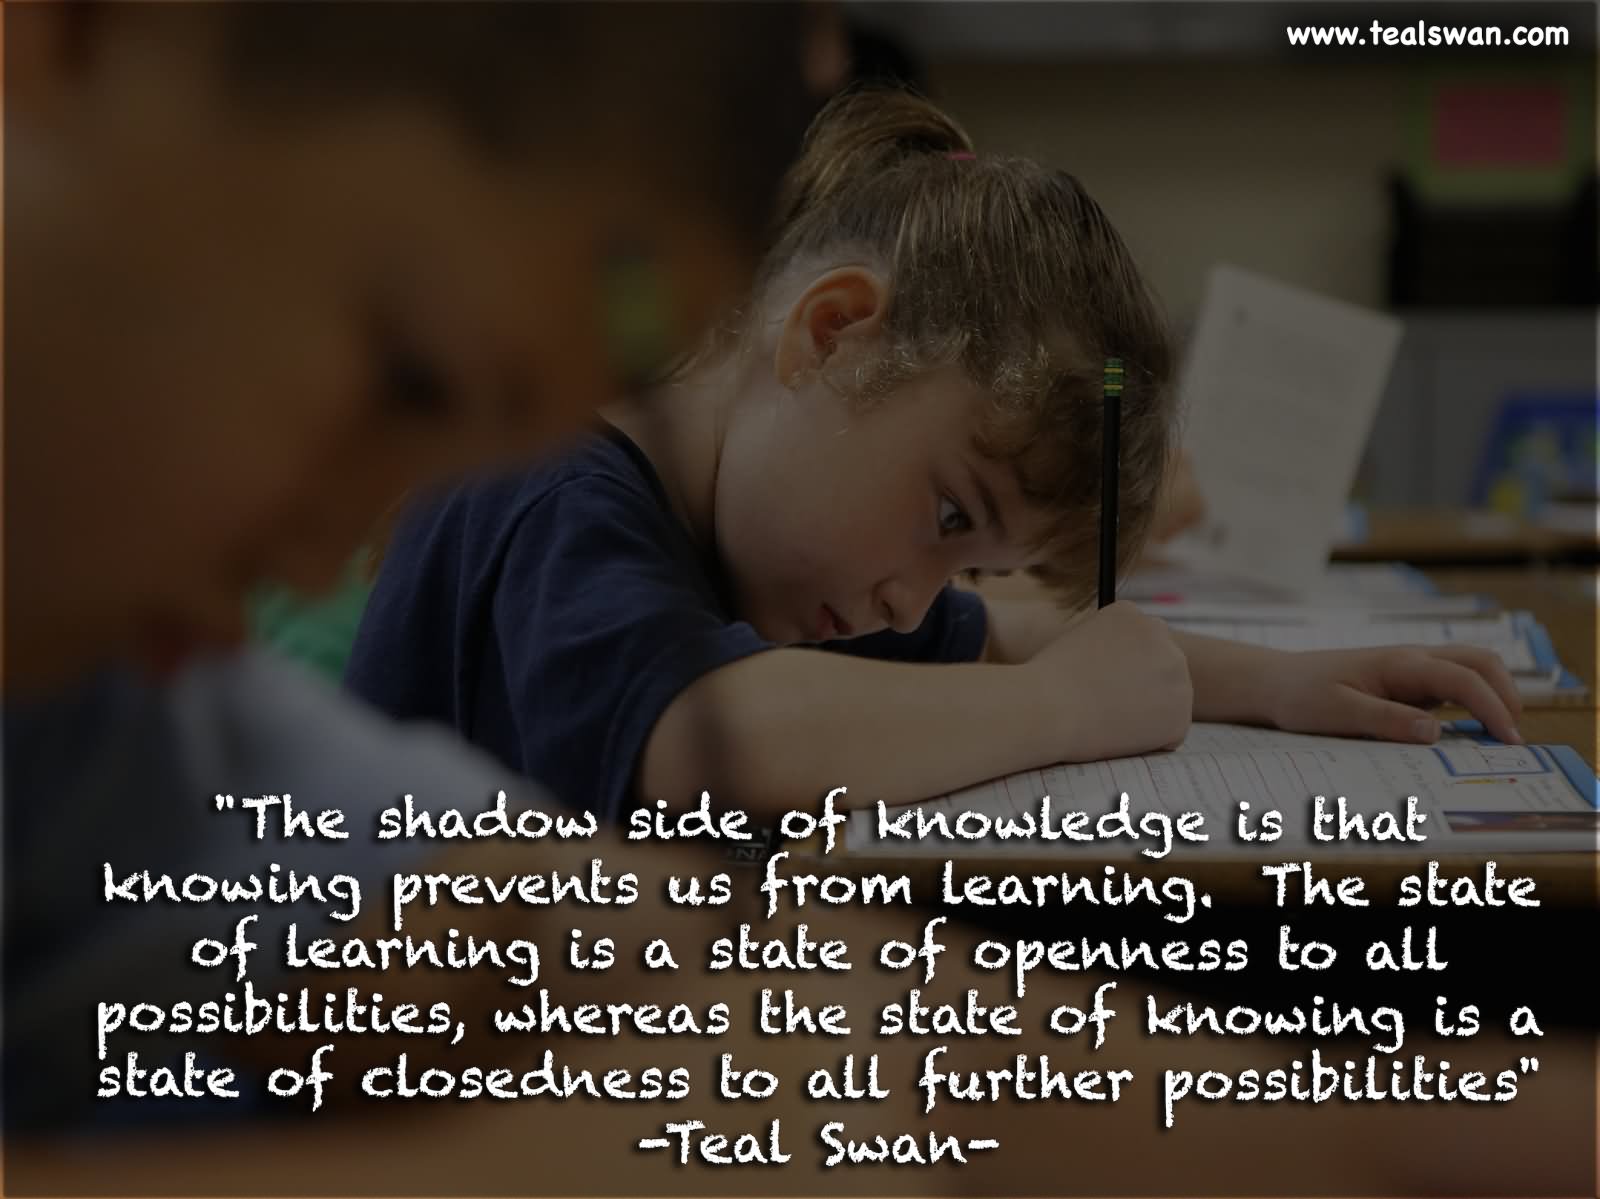 The shadow side of knowledge is that knowing prevents us from learning. The state of learning is a state of openness to all possibilities, whereas the state of knowing is a state of closedness to all further possibilities